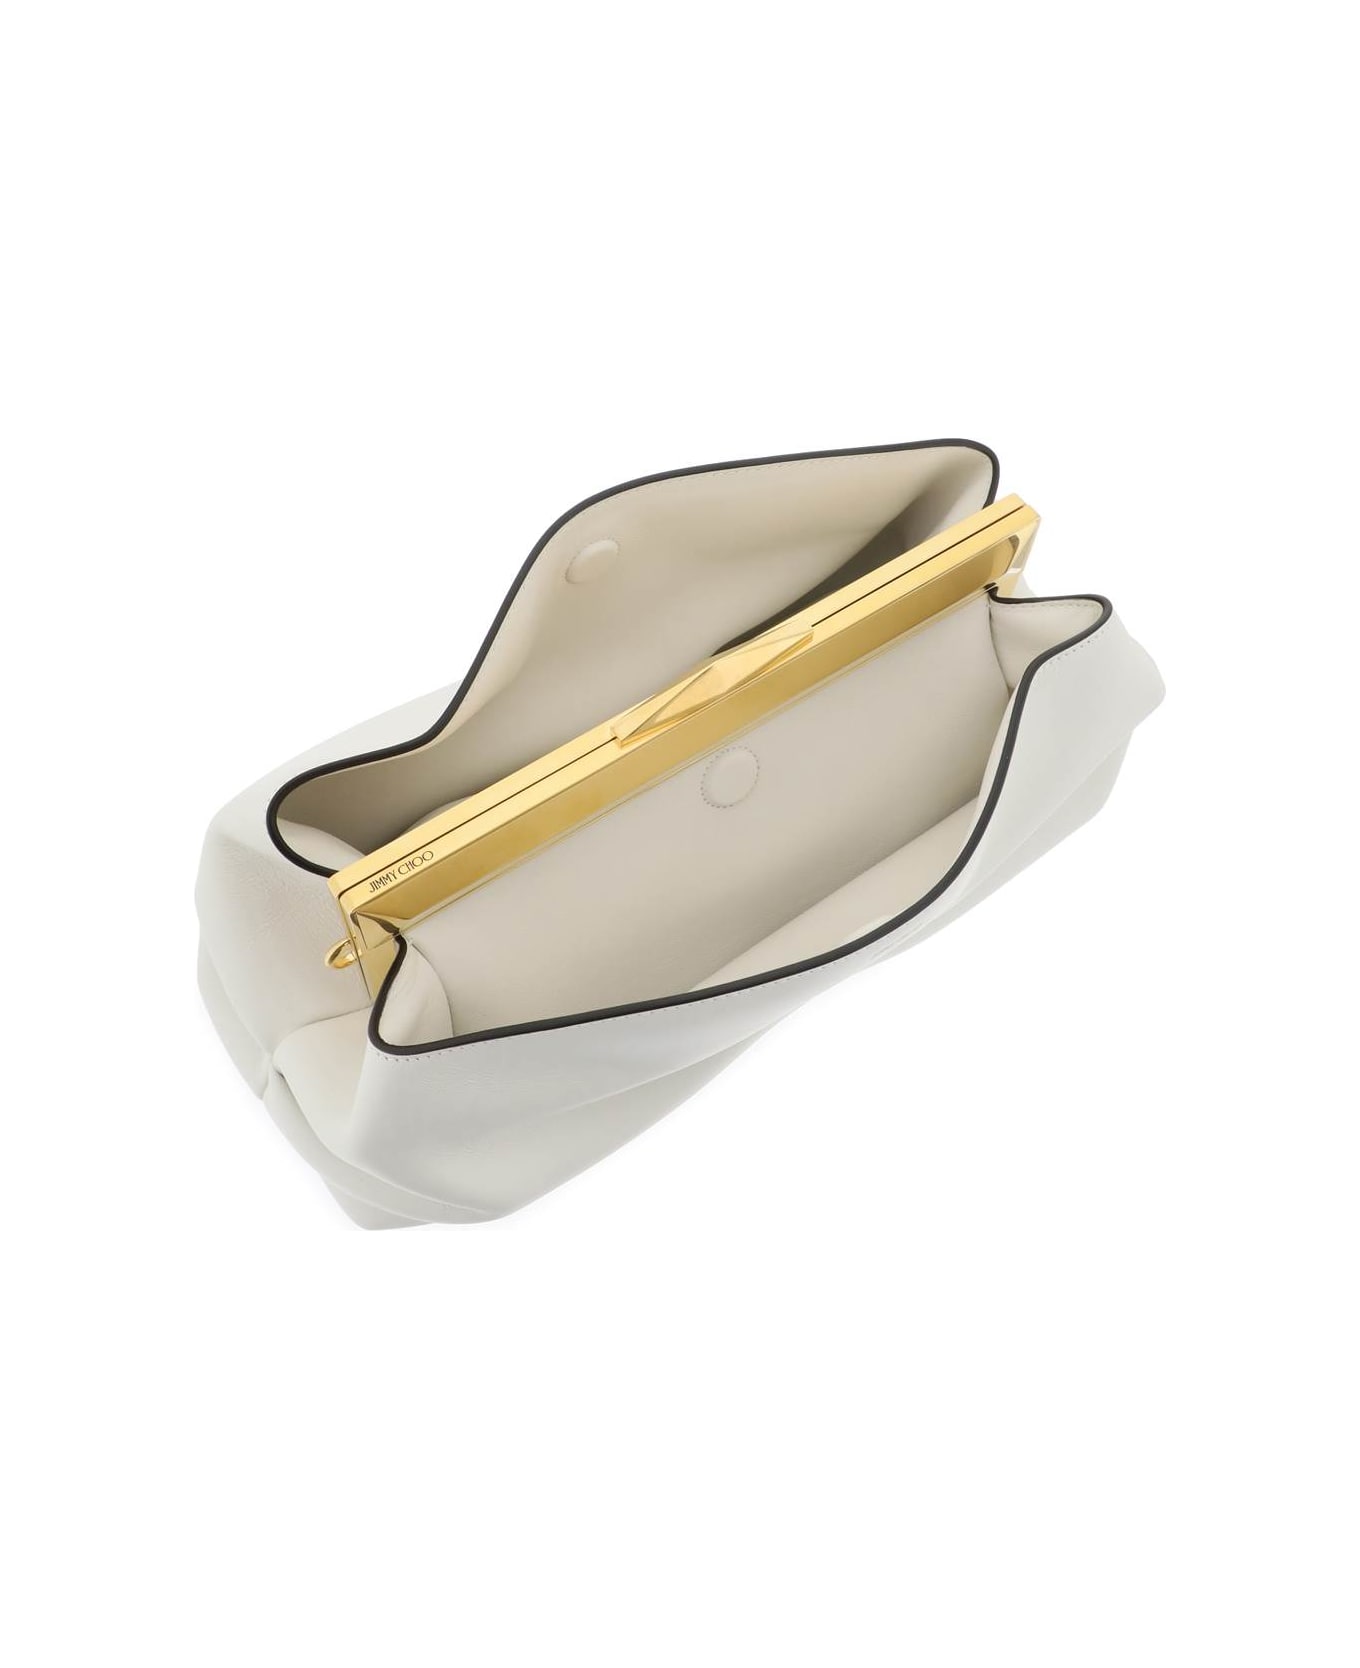 Jimmy Choo Leather Diamond Frame Clutch - LATTE GOLD (White) クラッチバッグ